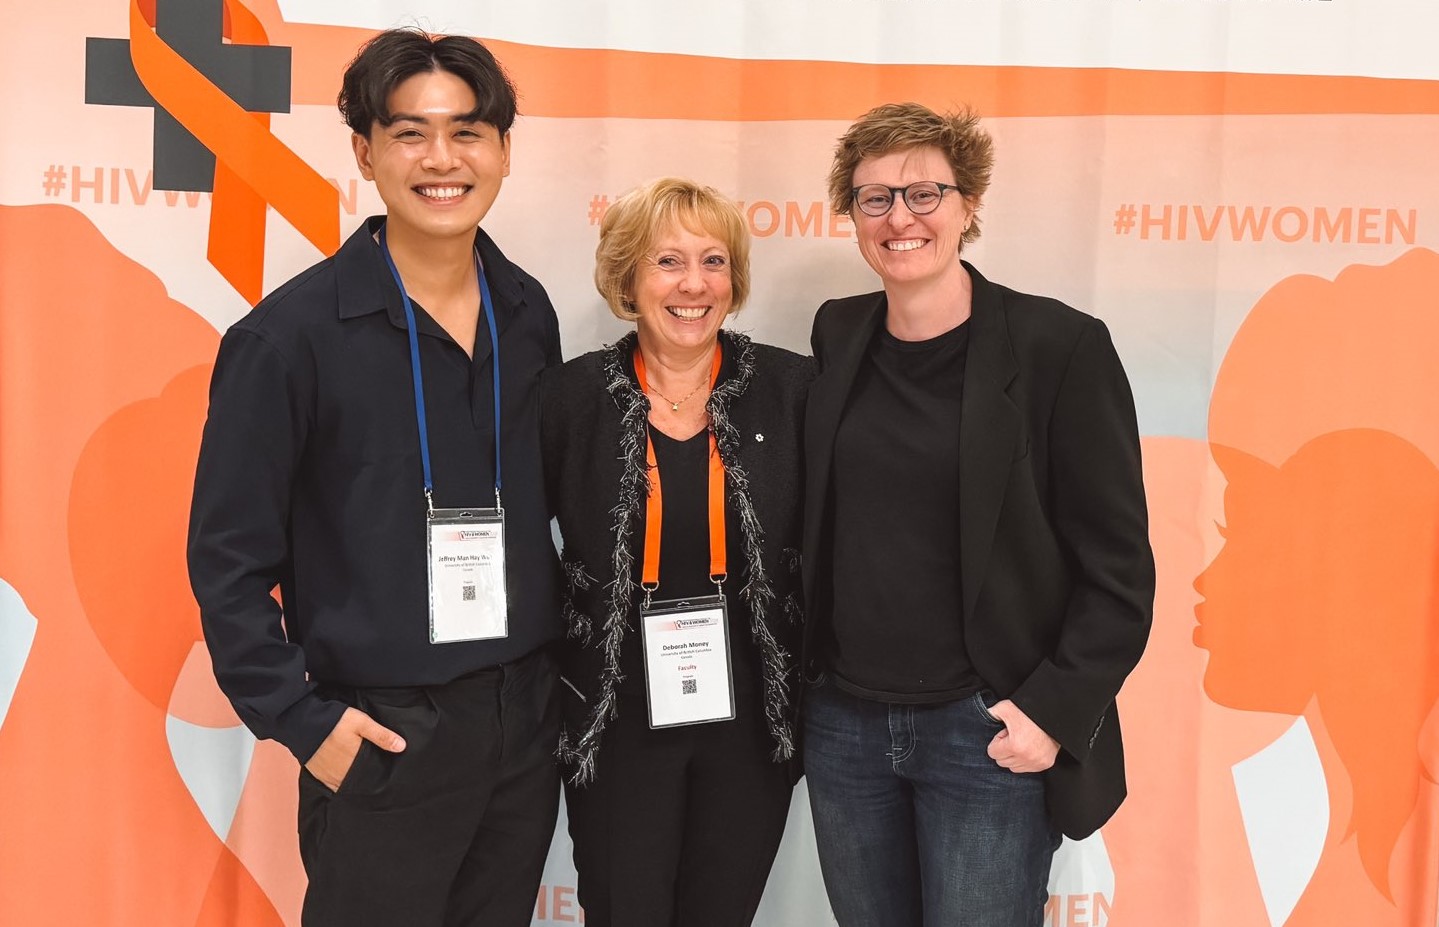 Congratulations to RID Program Clinical Research Fellow Dr. Jeffrey Wong on receiving the Best Early Career Presenter Award at the 2024 International Workshop on HIV & Women!